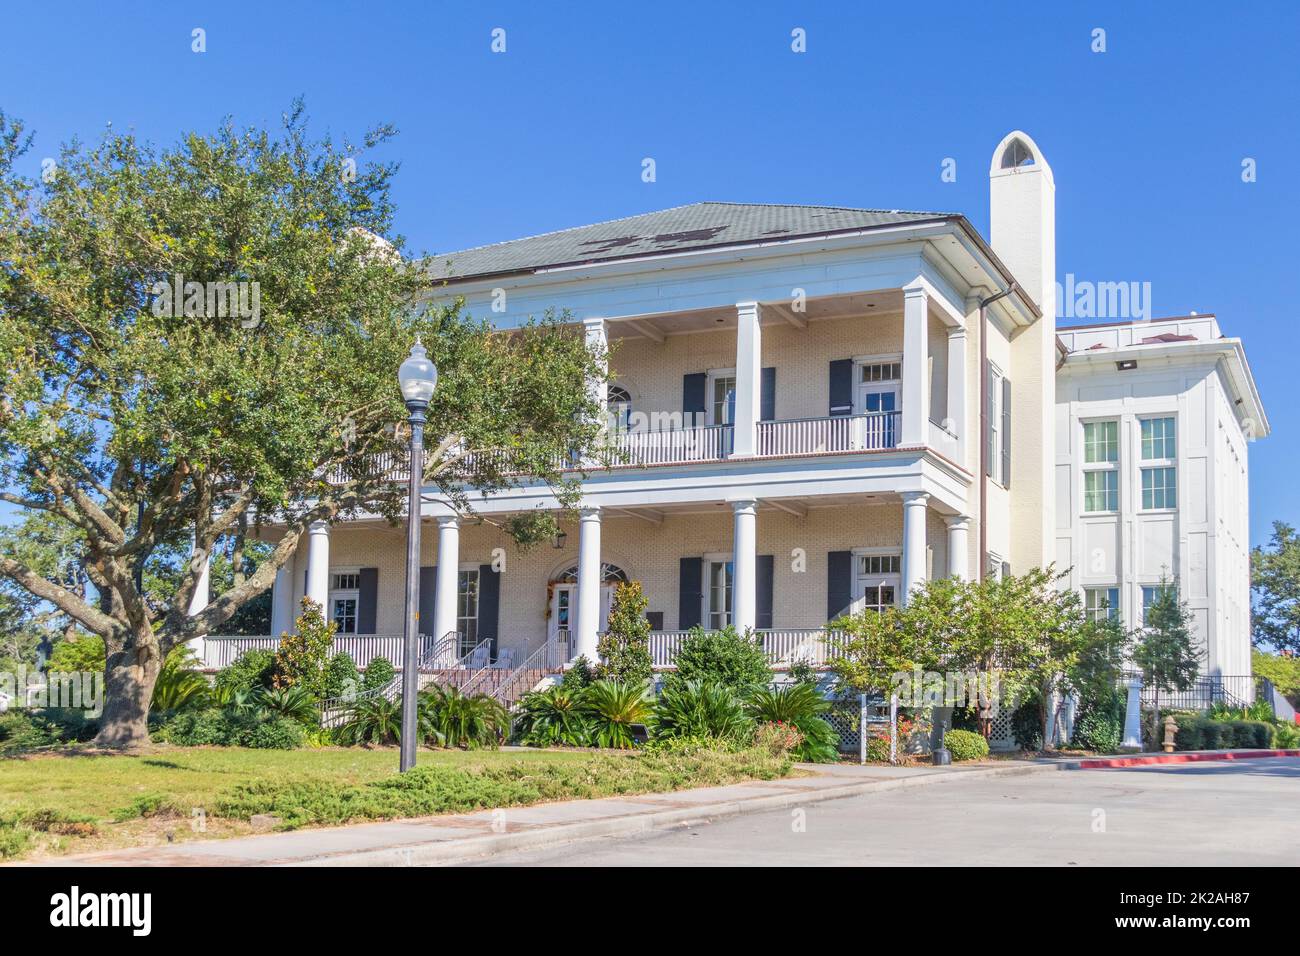 Biloxi Mississippi Visitor Complex and museum. Antebellum building built on property of historic home destroyed by Hurricane Katrina. Stock Photo